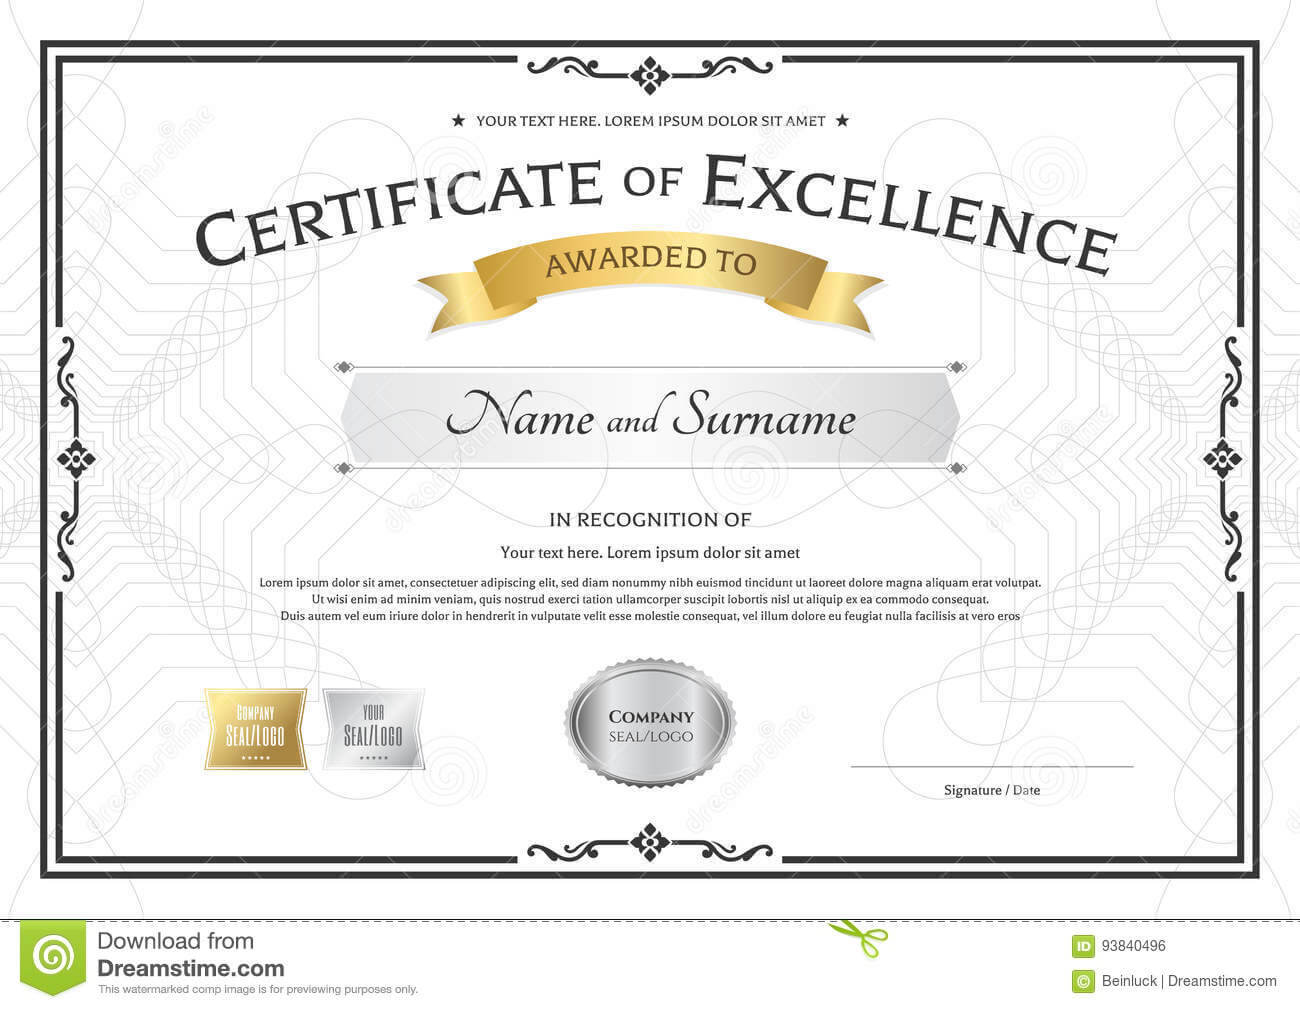 Certificate Of Excellence Template With Gold Award Ribbon On Intended For Award Of Excellence Certificate Template